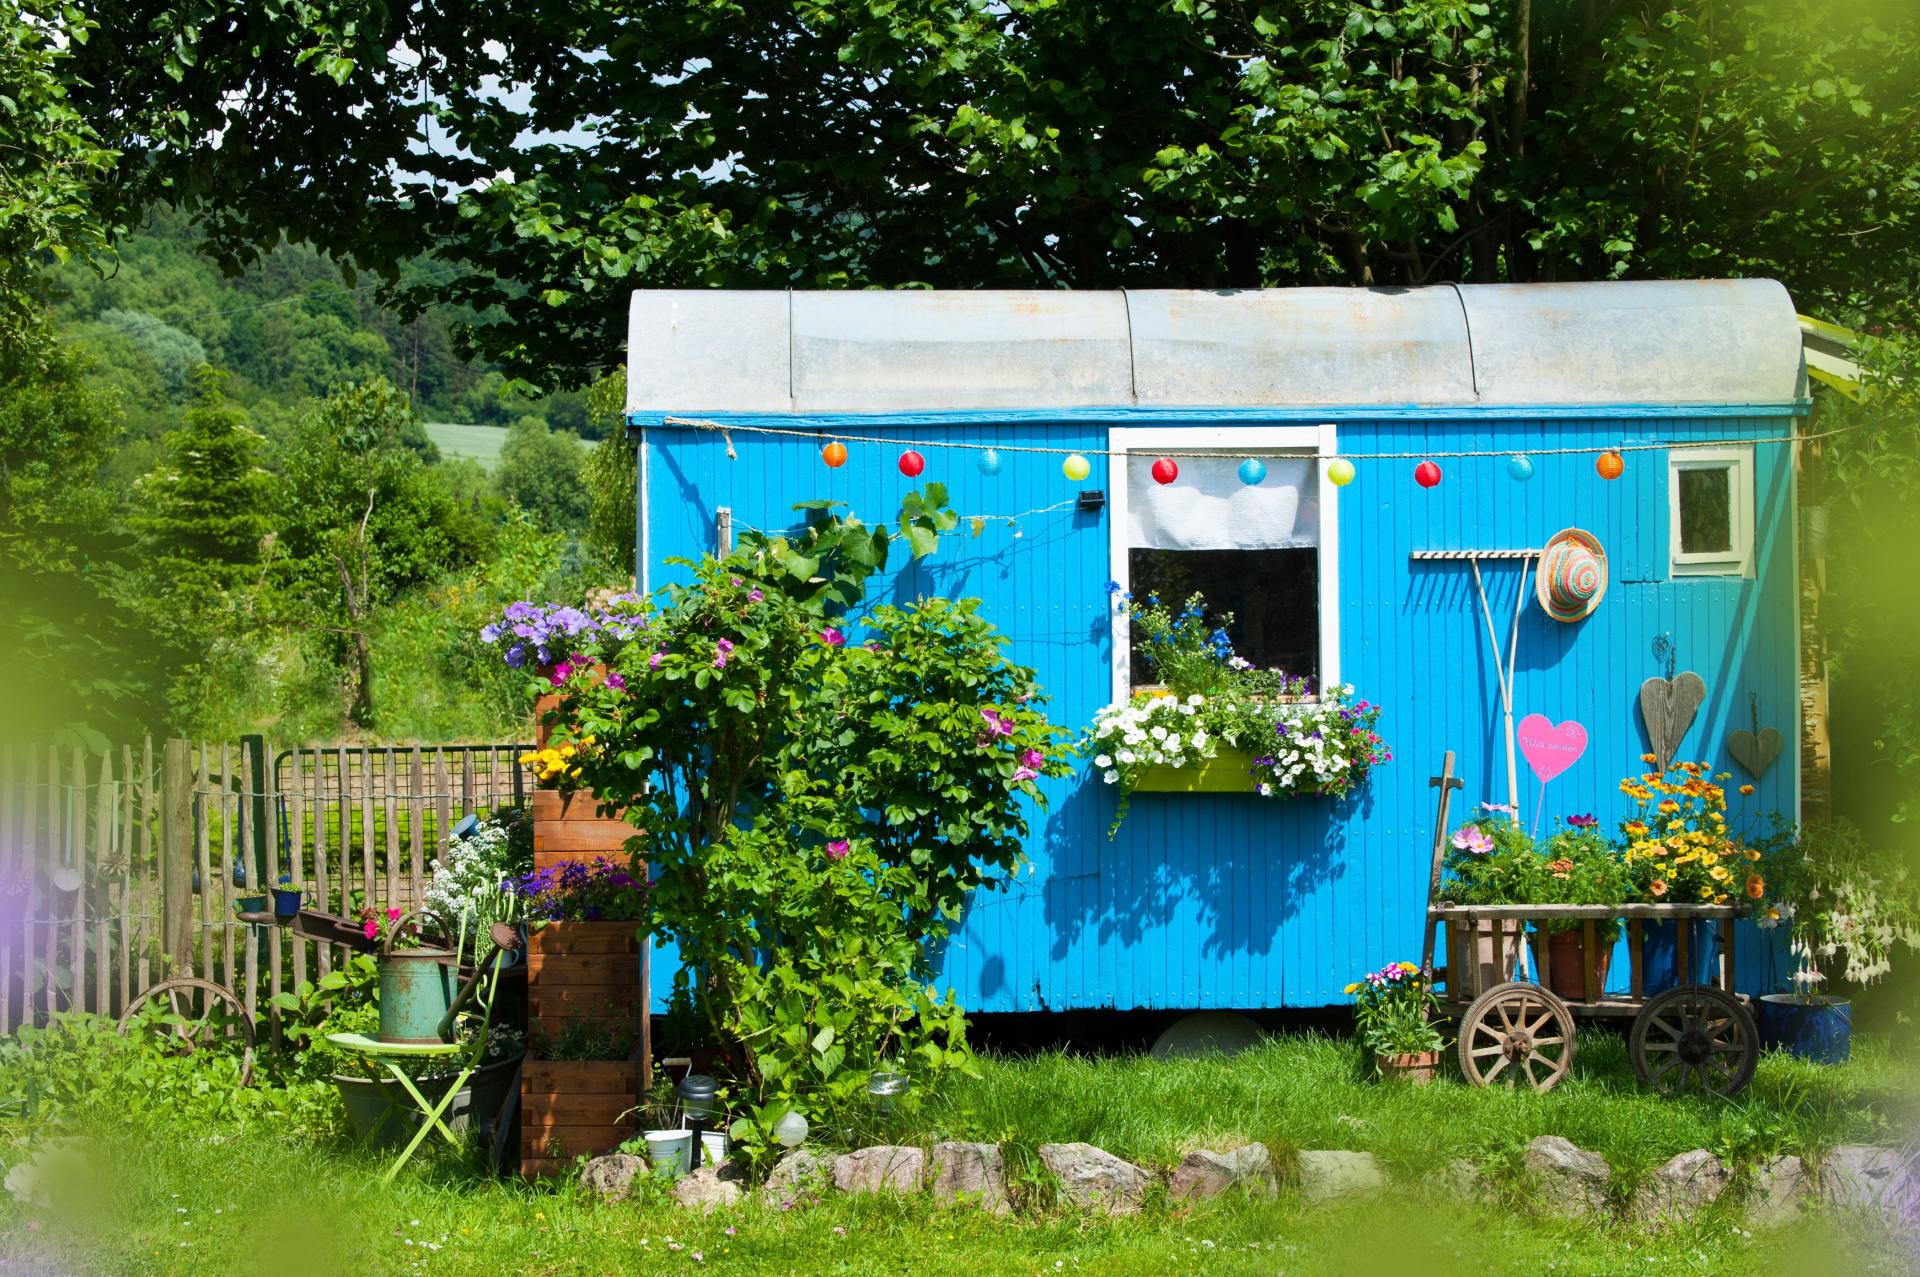 How to create the perfect she-shed garden retreat, according to top interior designers 